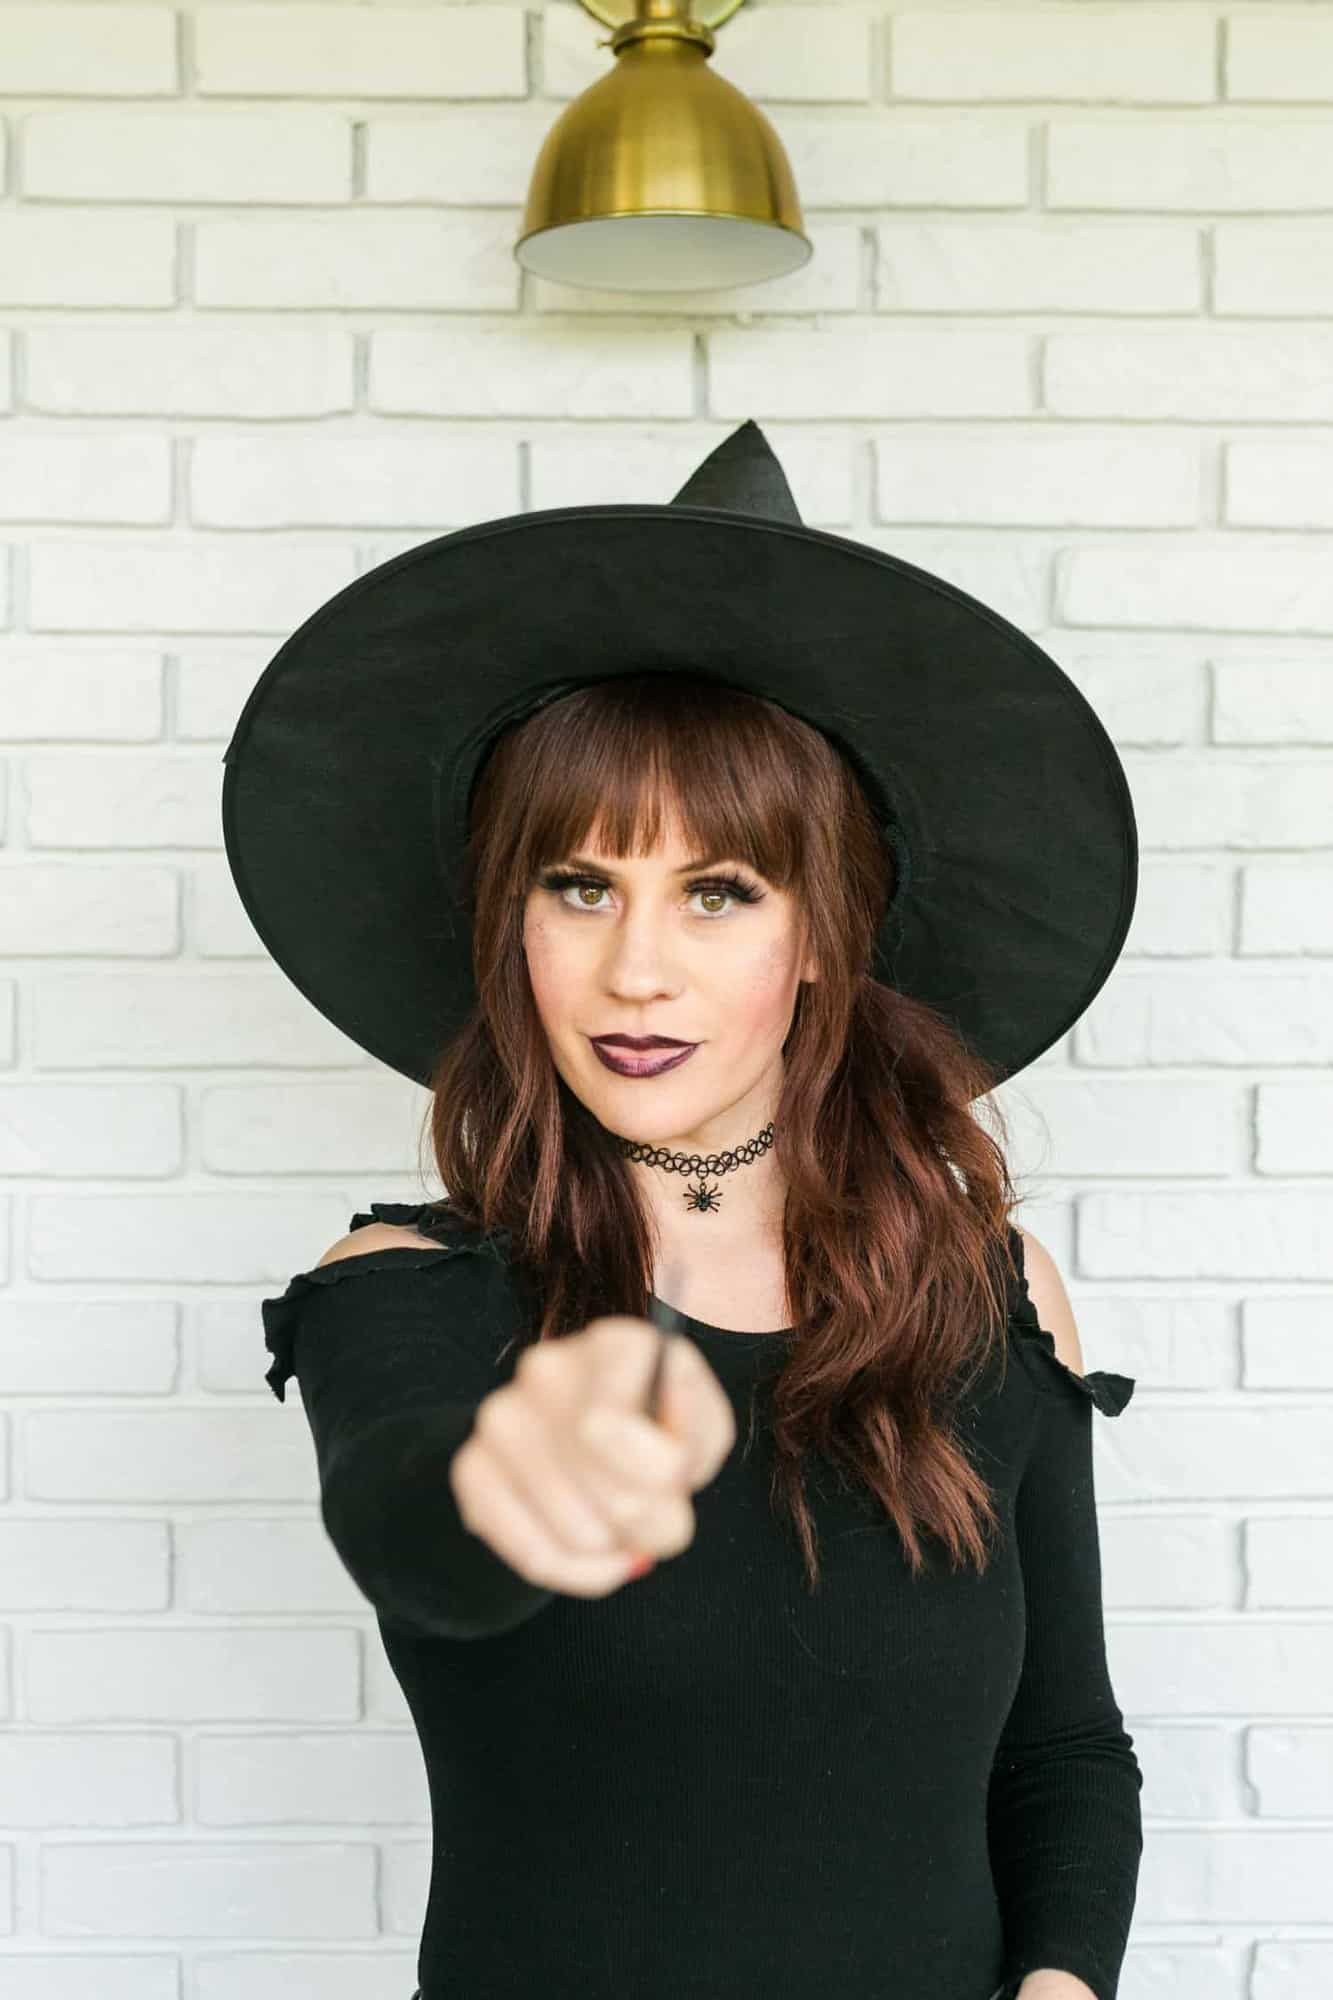 29 Witch Makeup Ideas That We'd Actually Want To Wear This